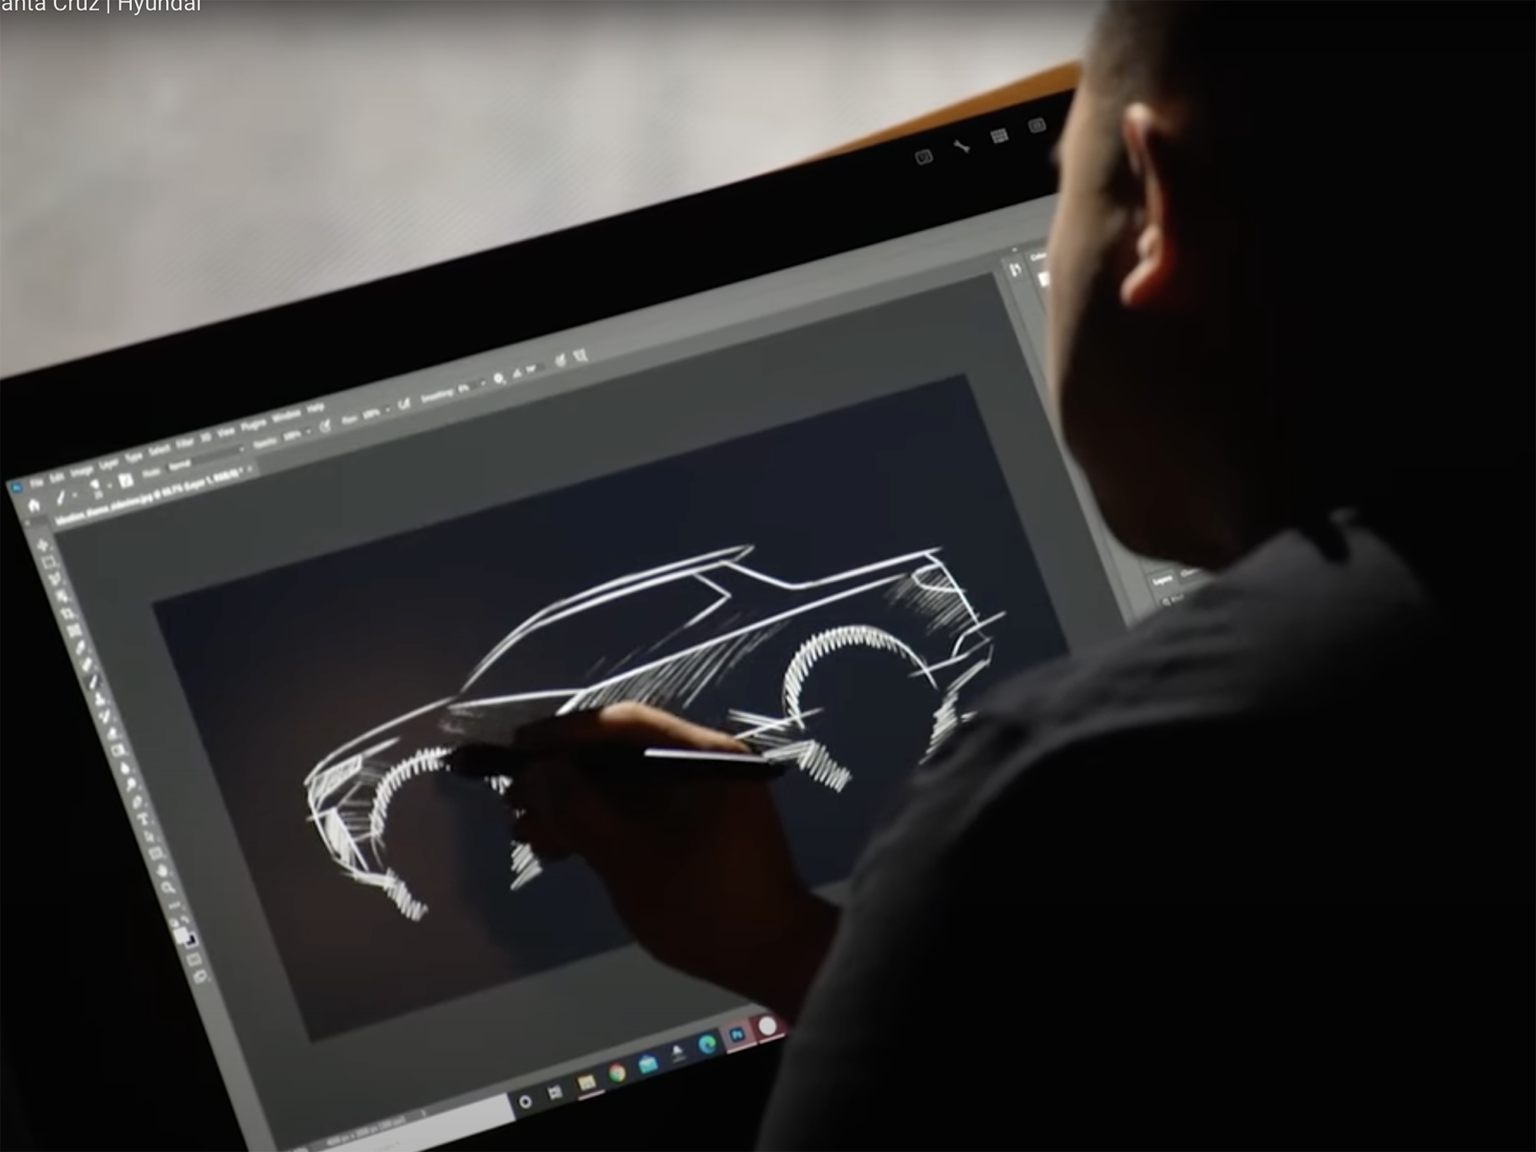 The Hyundai Santa Cruz will debut next week but ahead of that, the design department is giving a closer look at the truck in a new video.